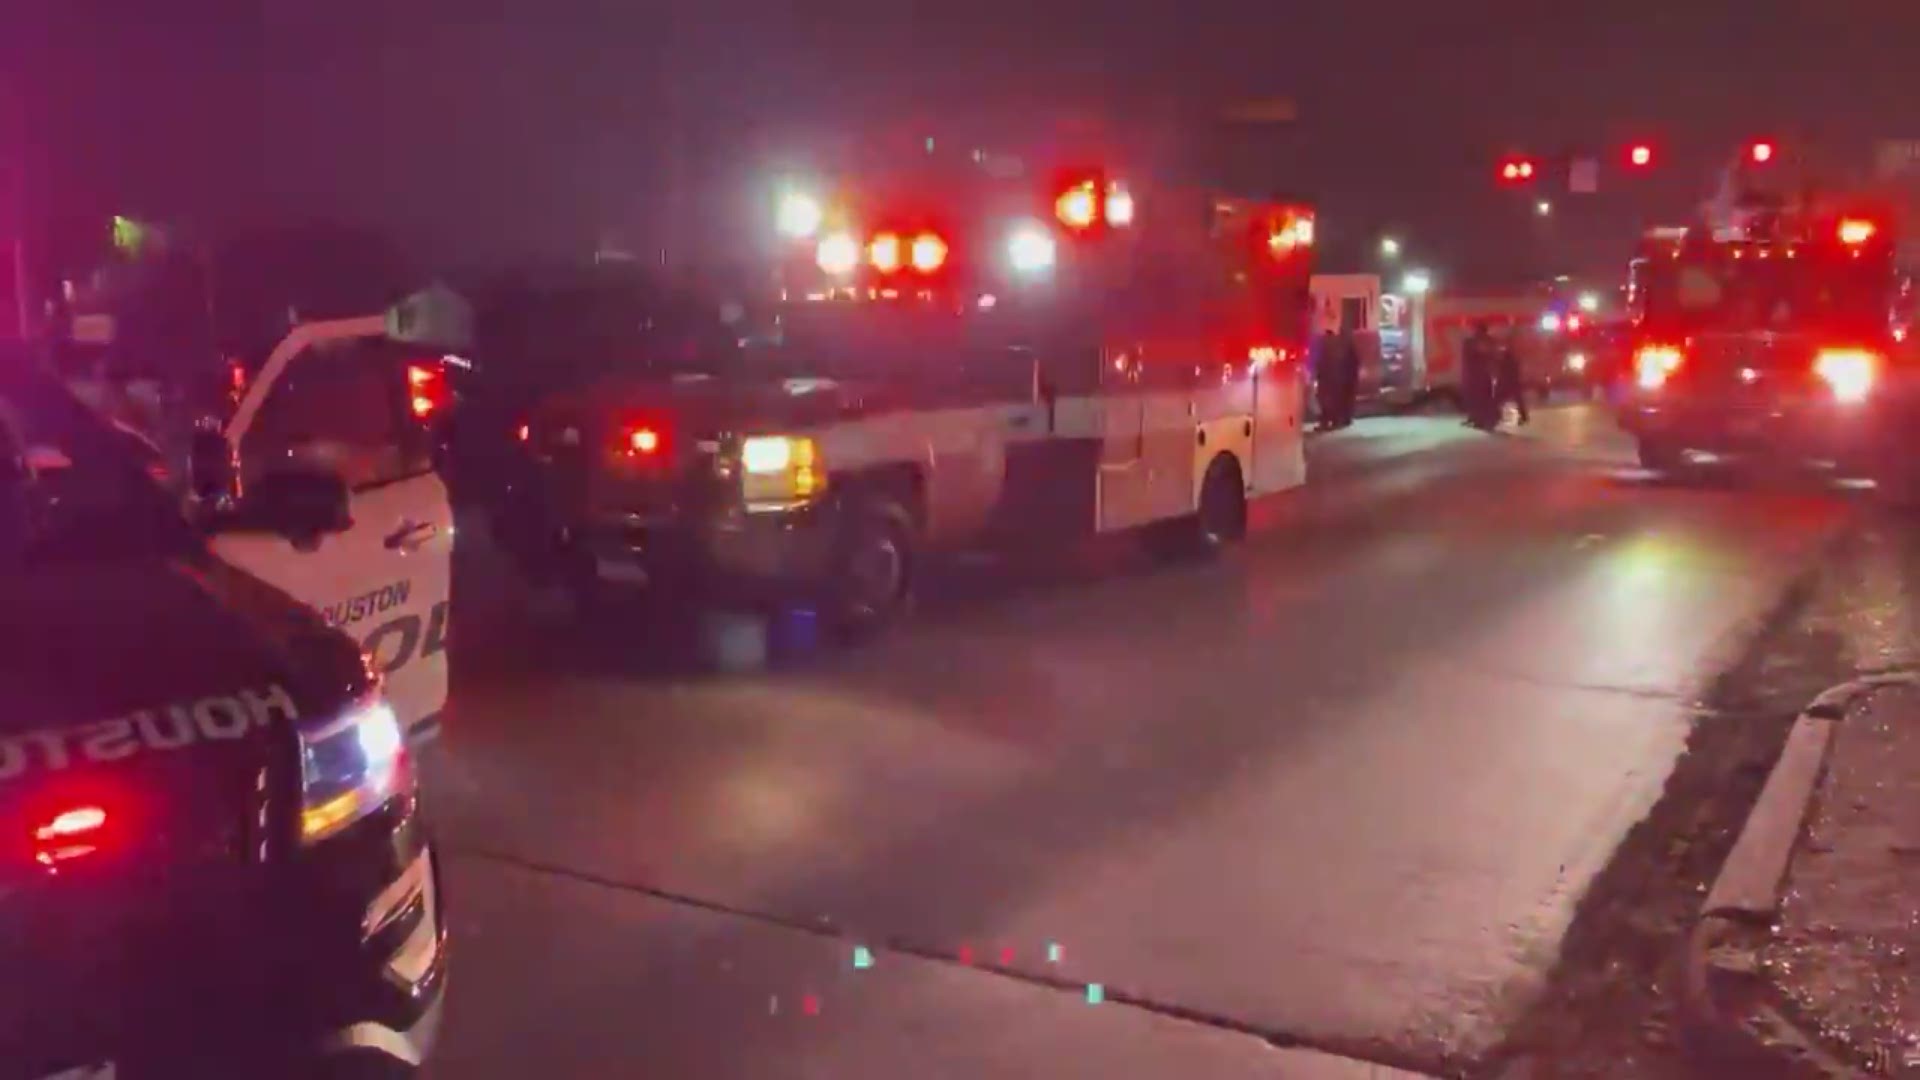 Police are investigating a possible hit-and-run crash that killed one person Wednesday night in north Houston.